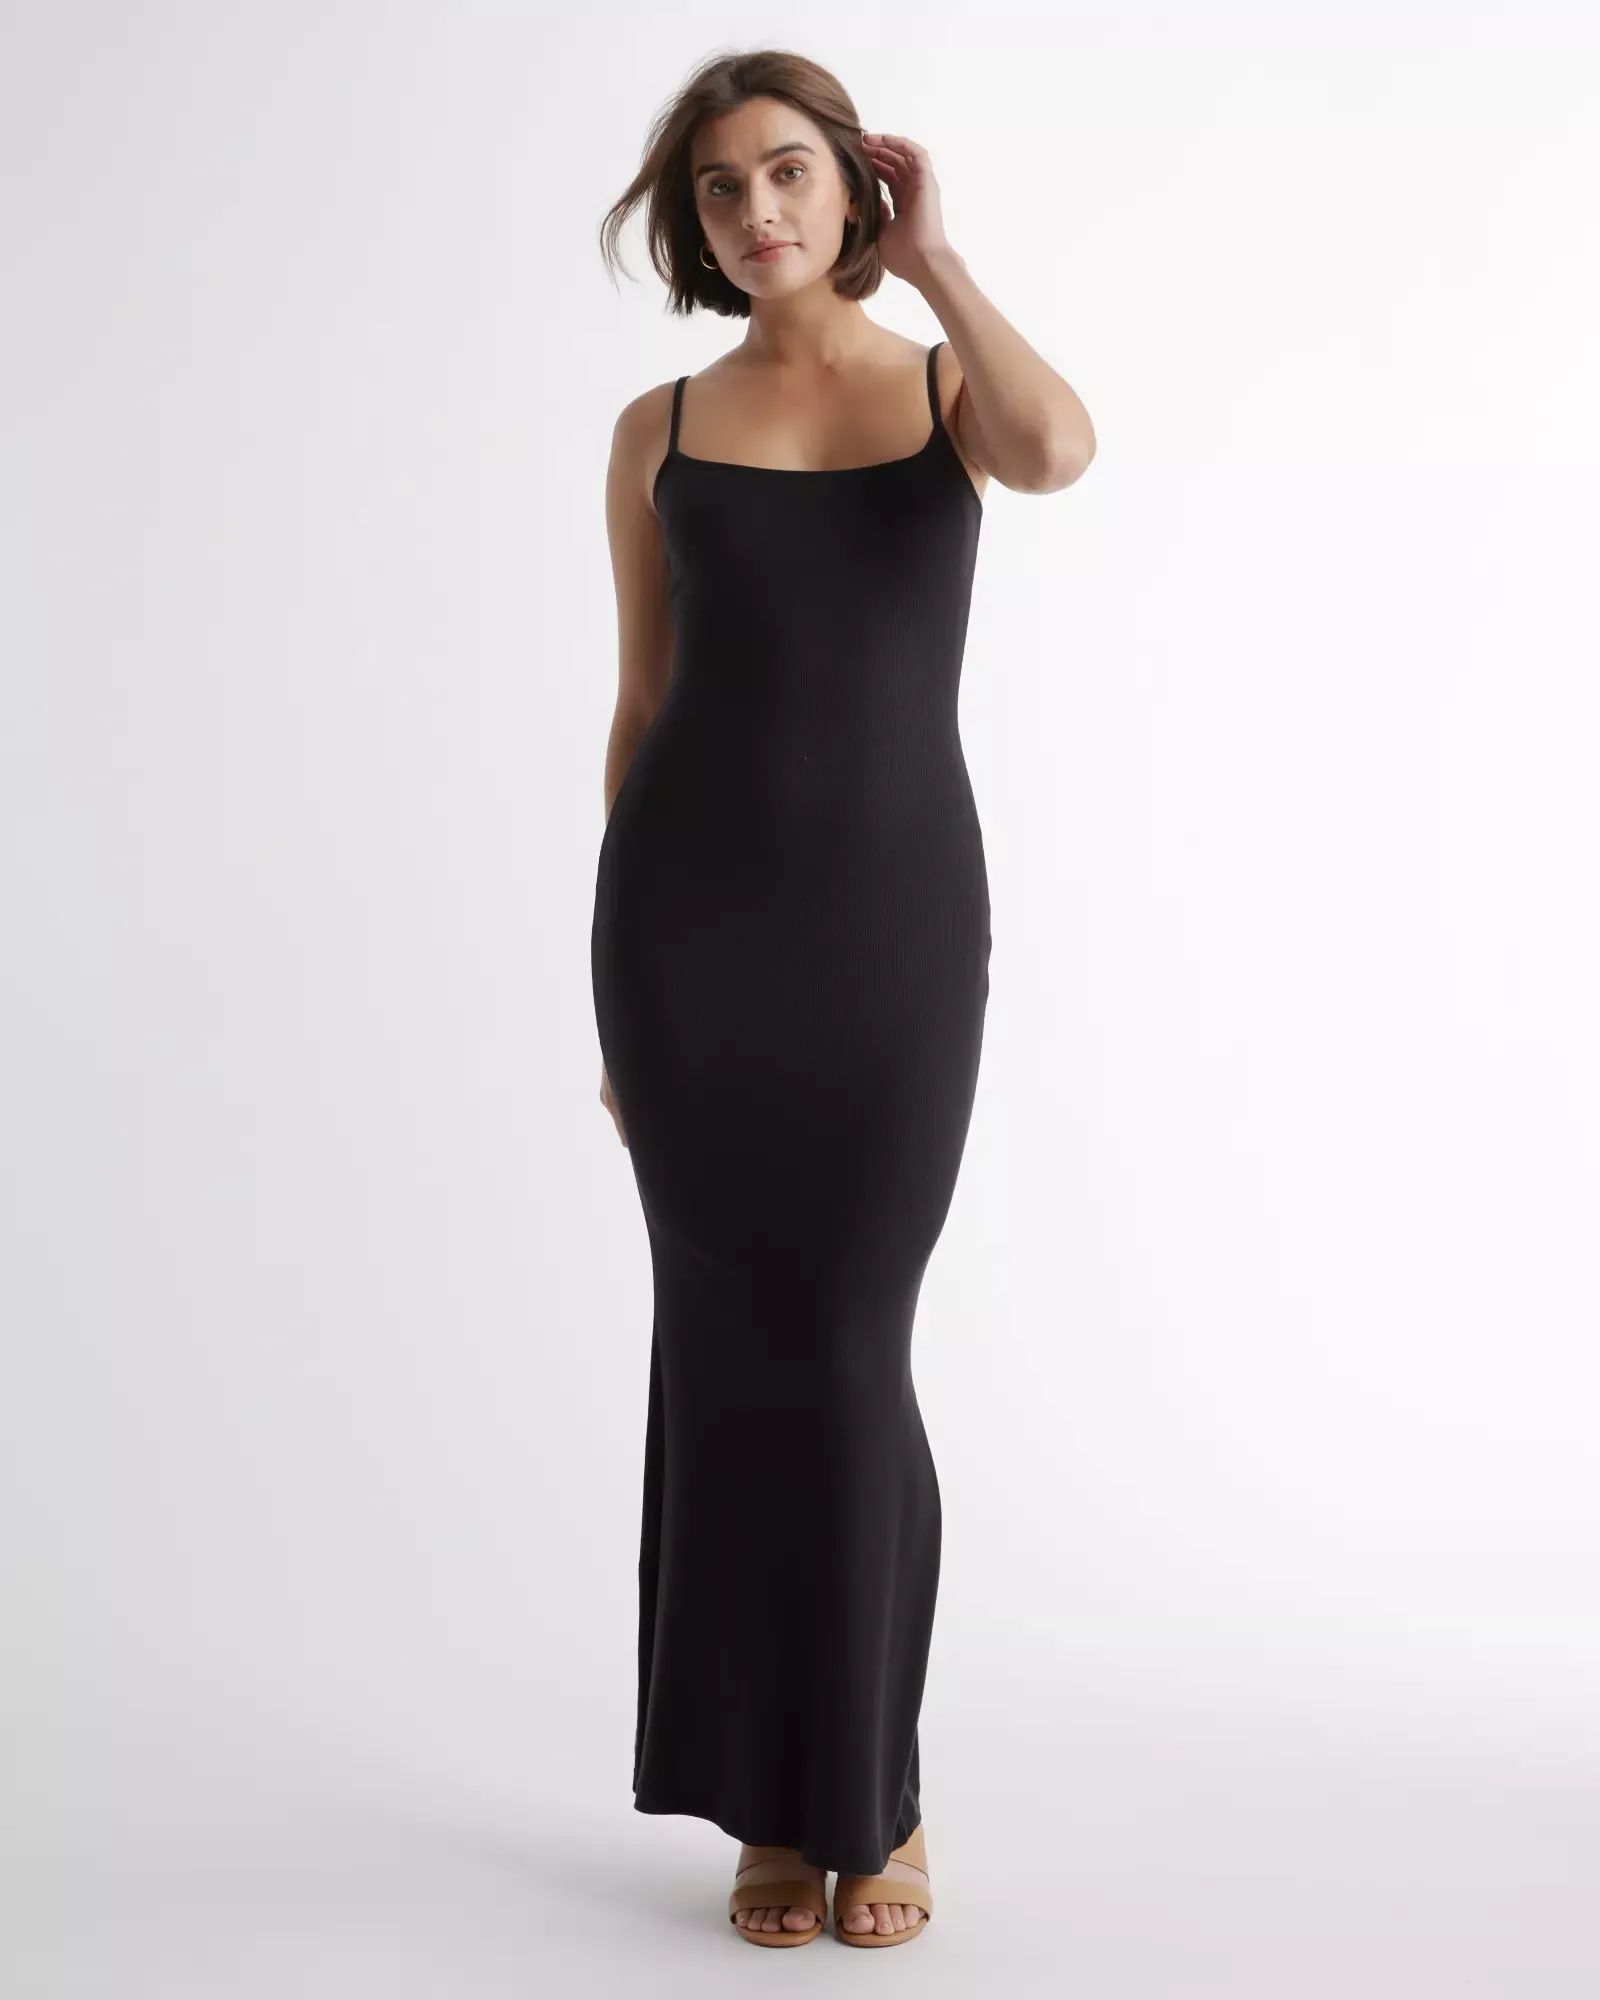 SKIMS Ribbed Long Slipdress curated on LTK